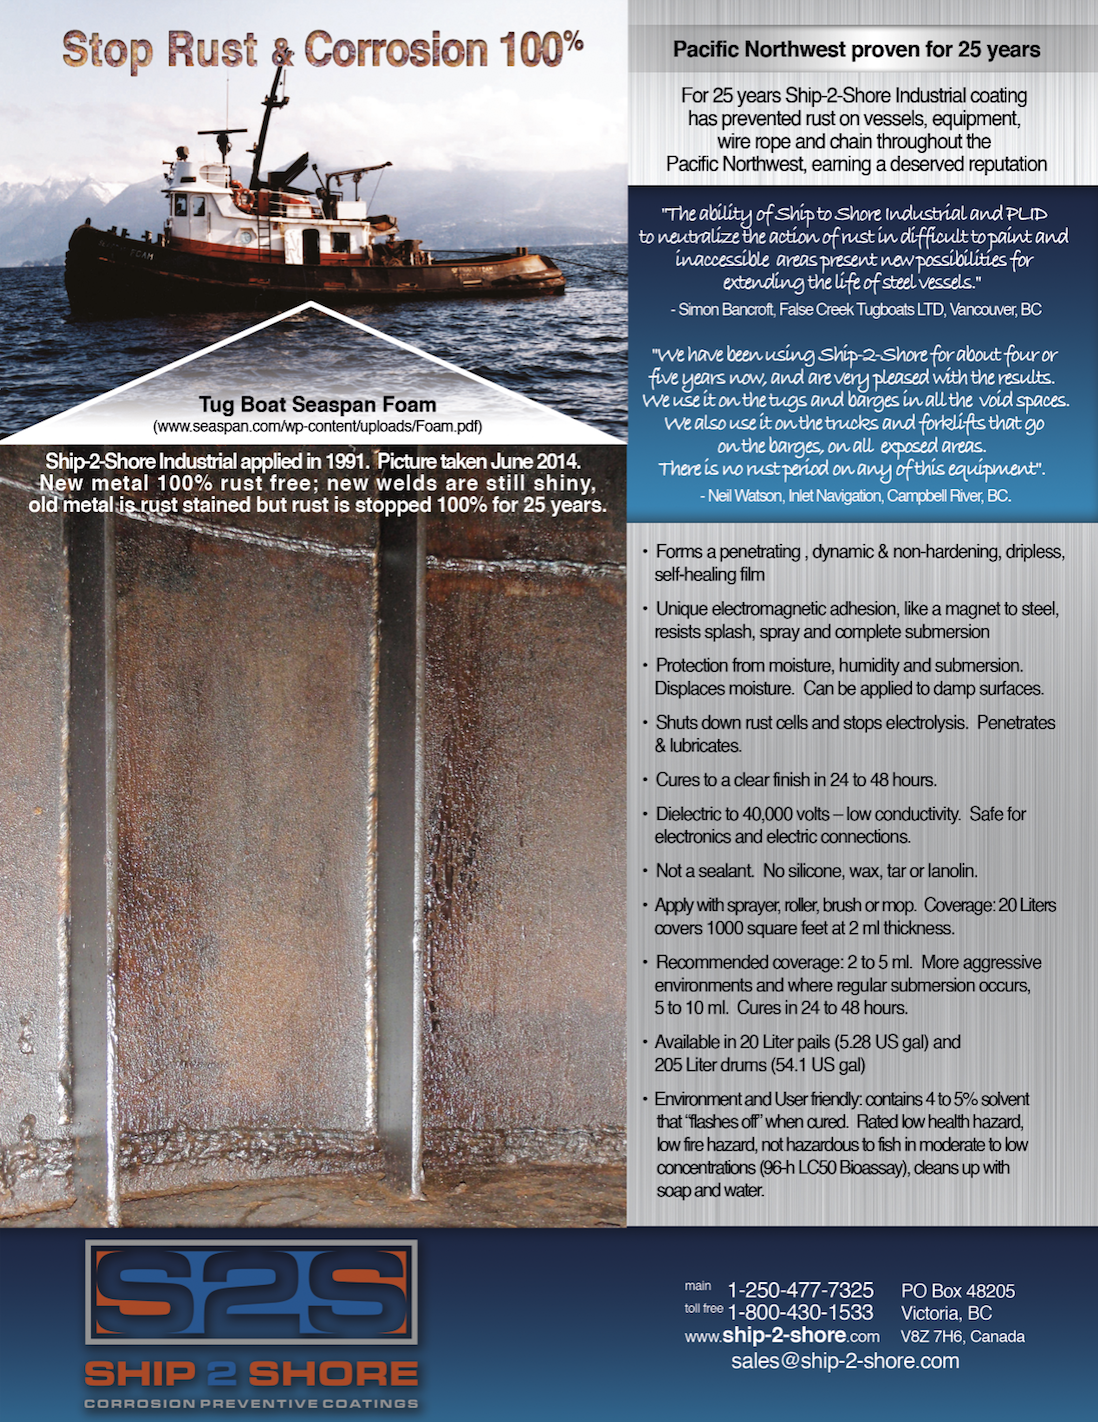 Ship-2-Shore Industrial Thick Film prevent rusting and corrosion for maritime work boats, tugboats, navy vessels, barges, wire rope, chains, anchors by displacing moisture, penetrating existing rust and corrosion